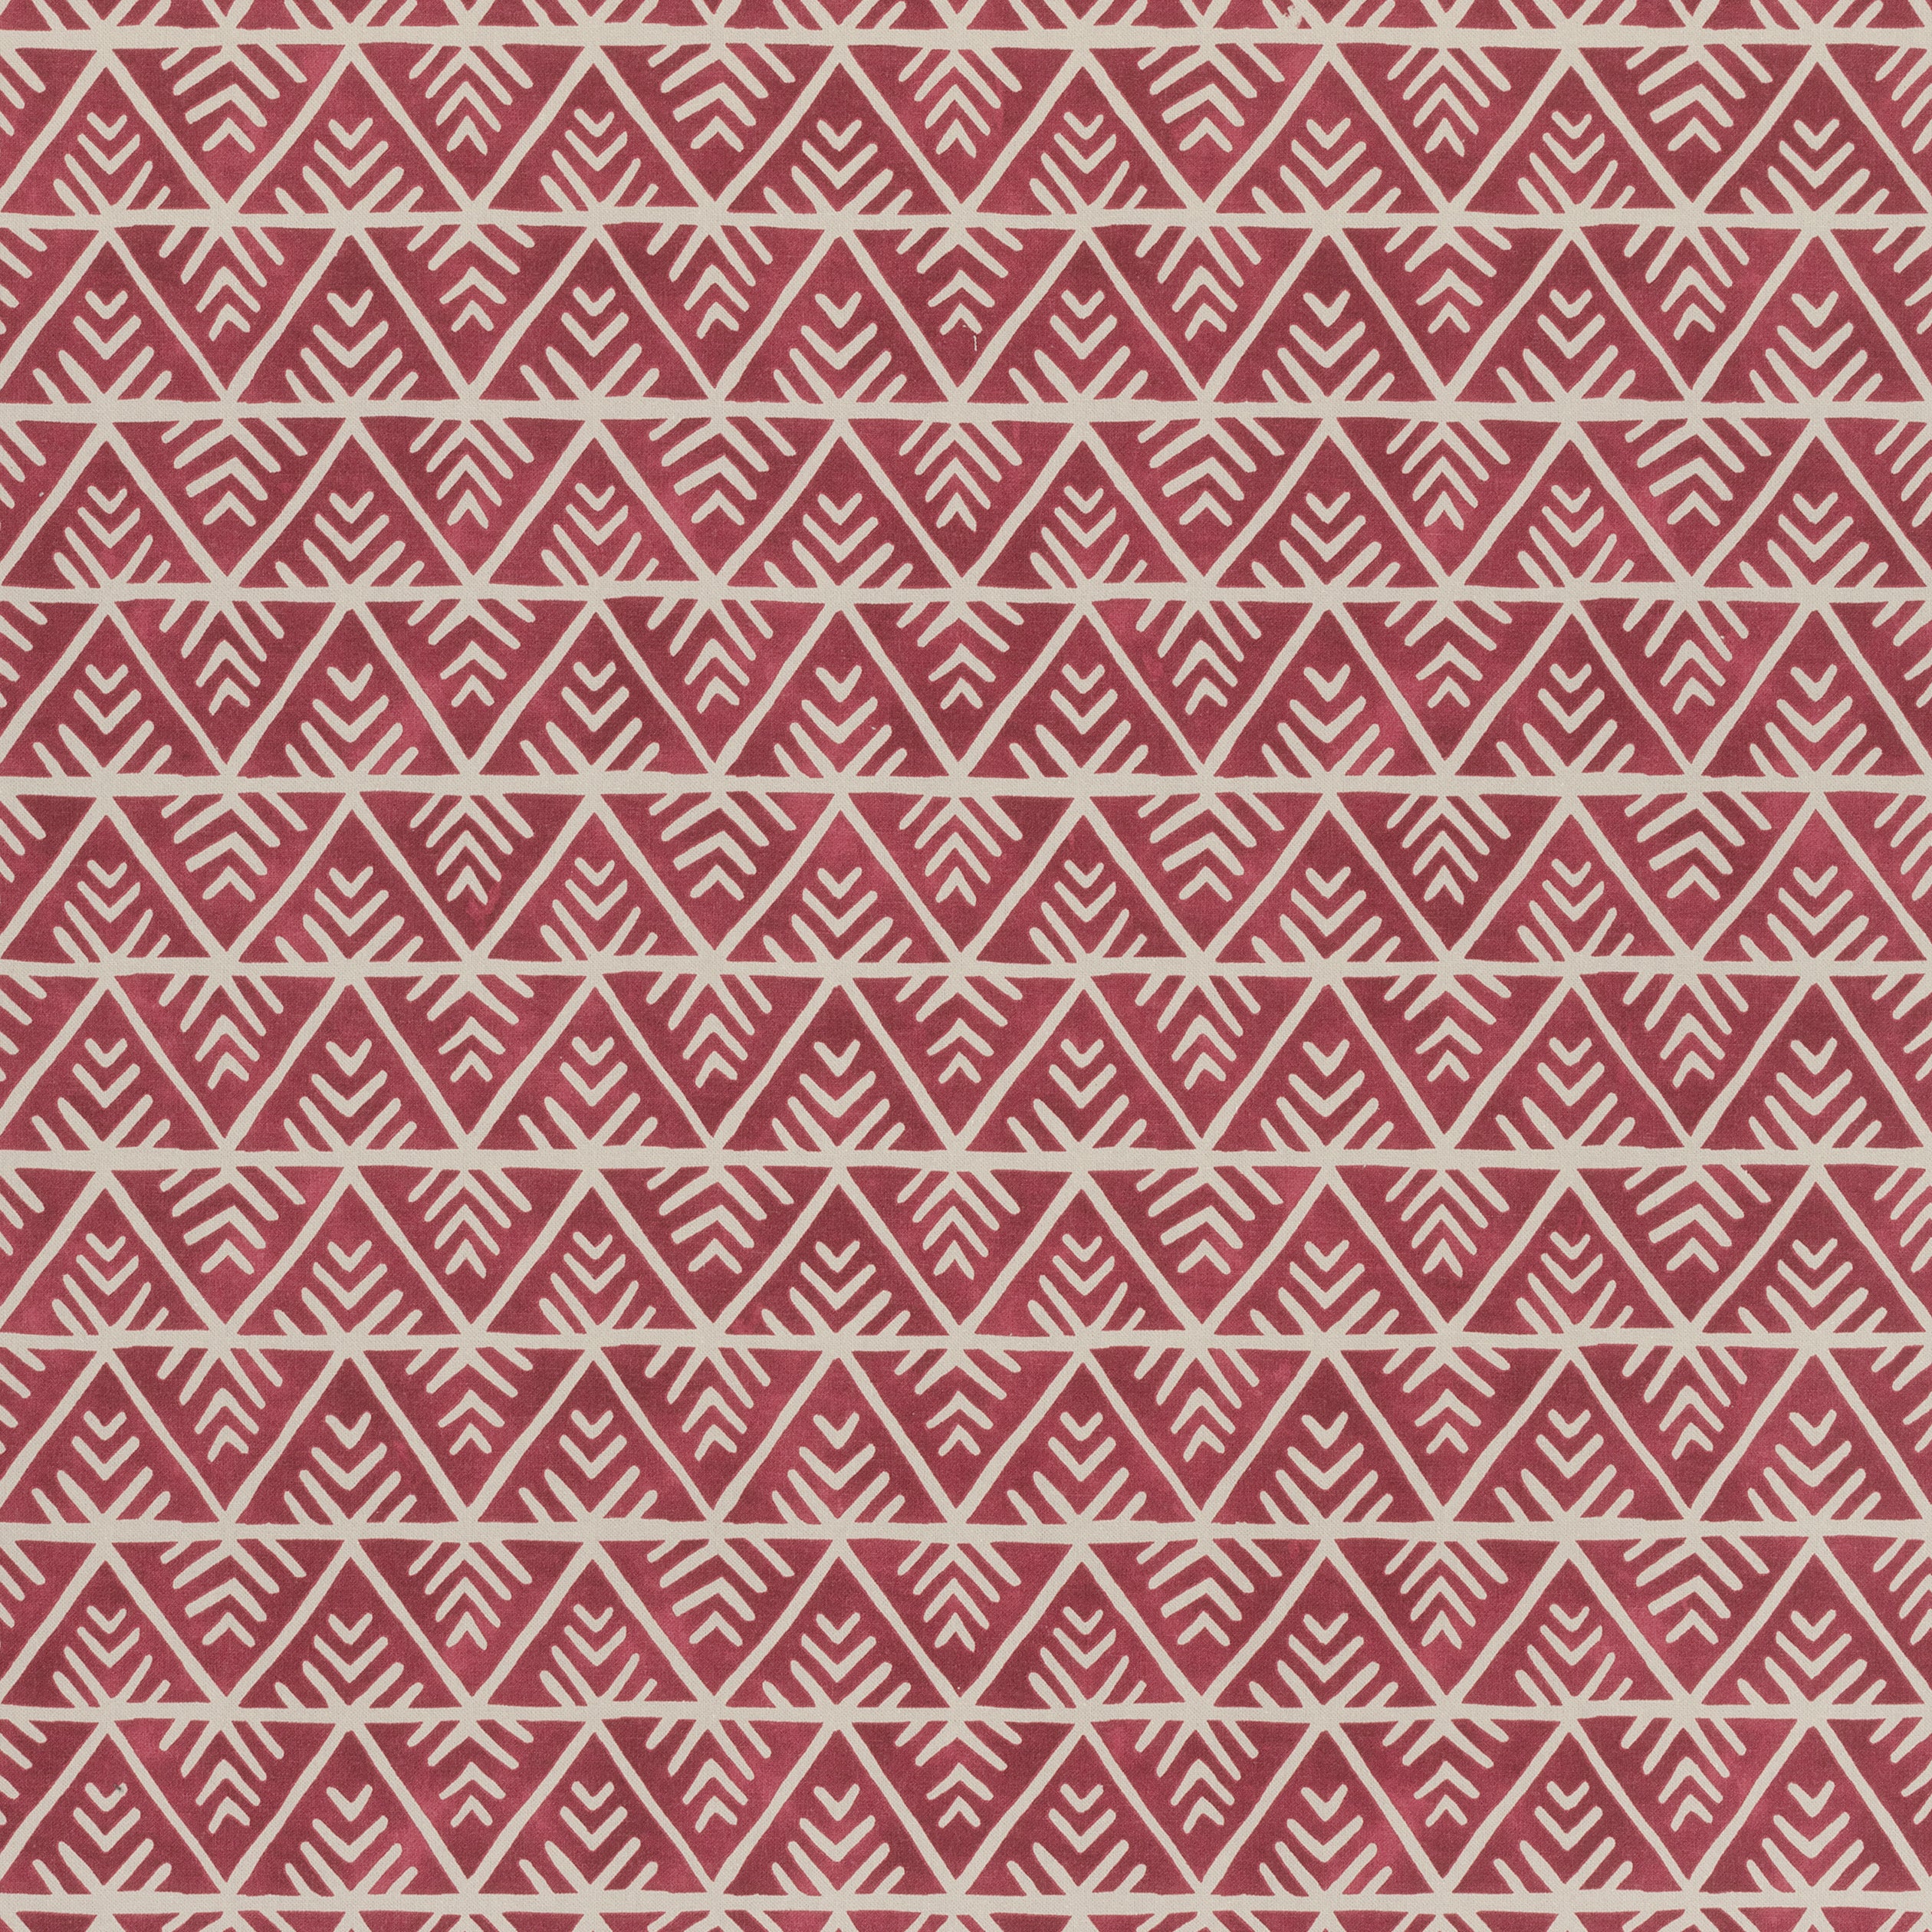 Jules fabric in red color - pattern number AF78706 - by Anna French in the Palampore collection